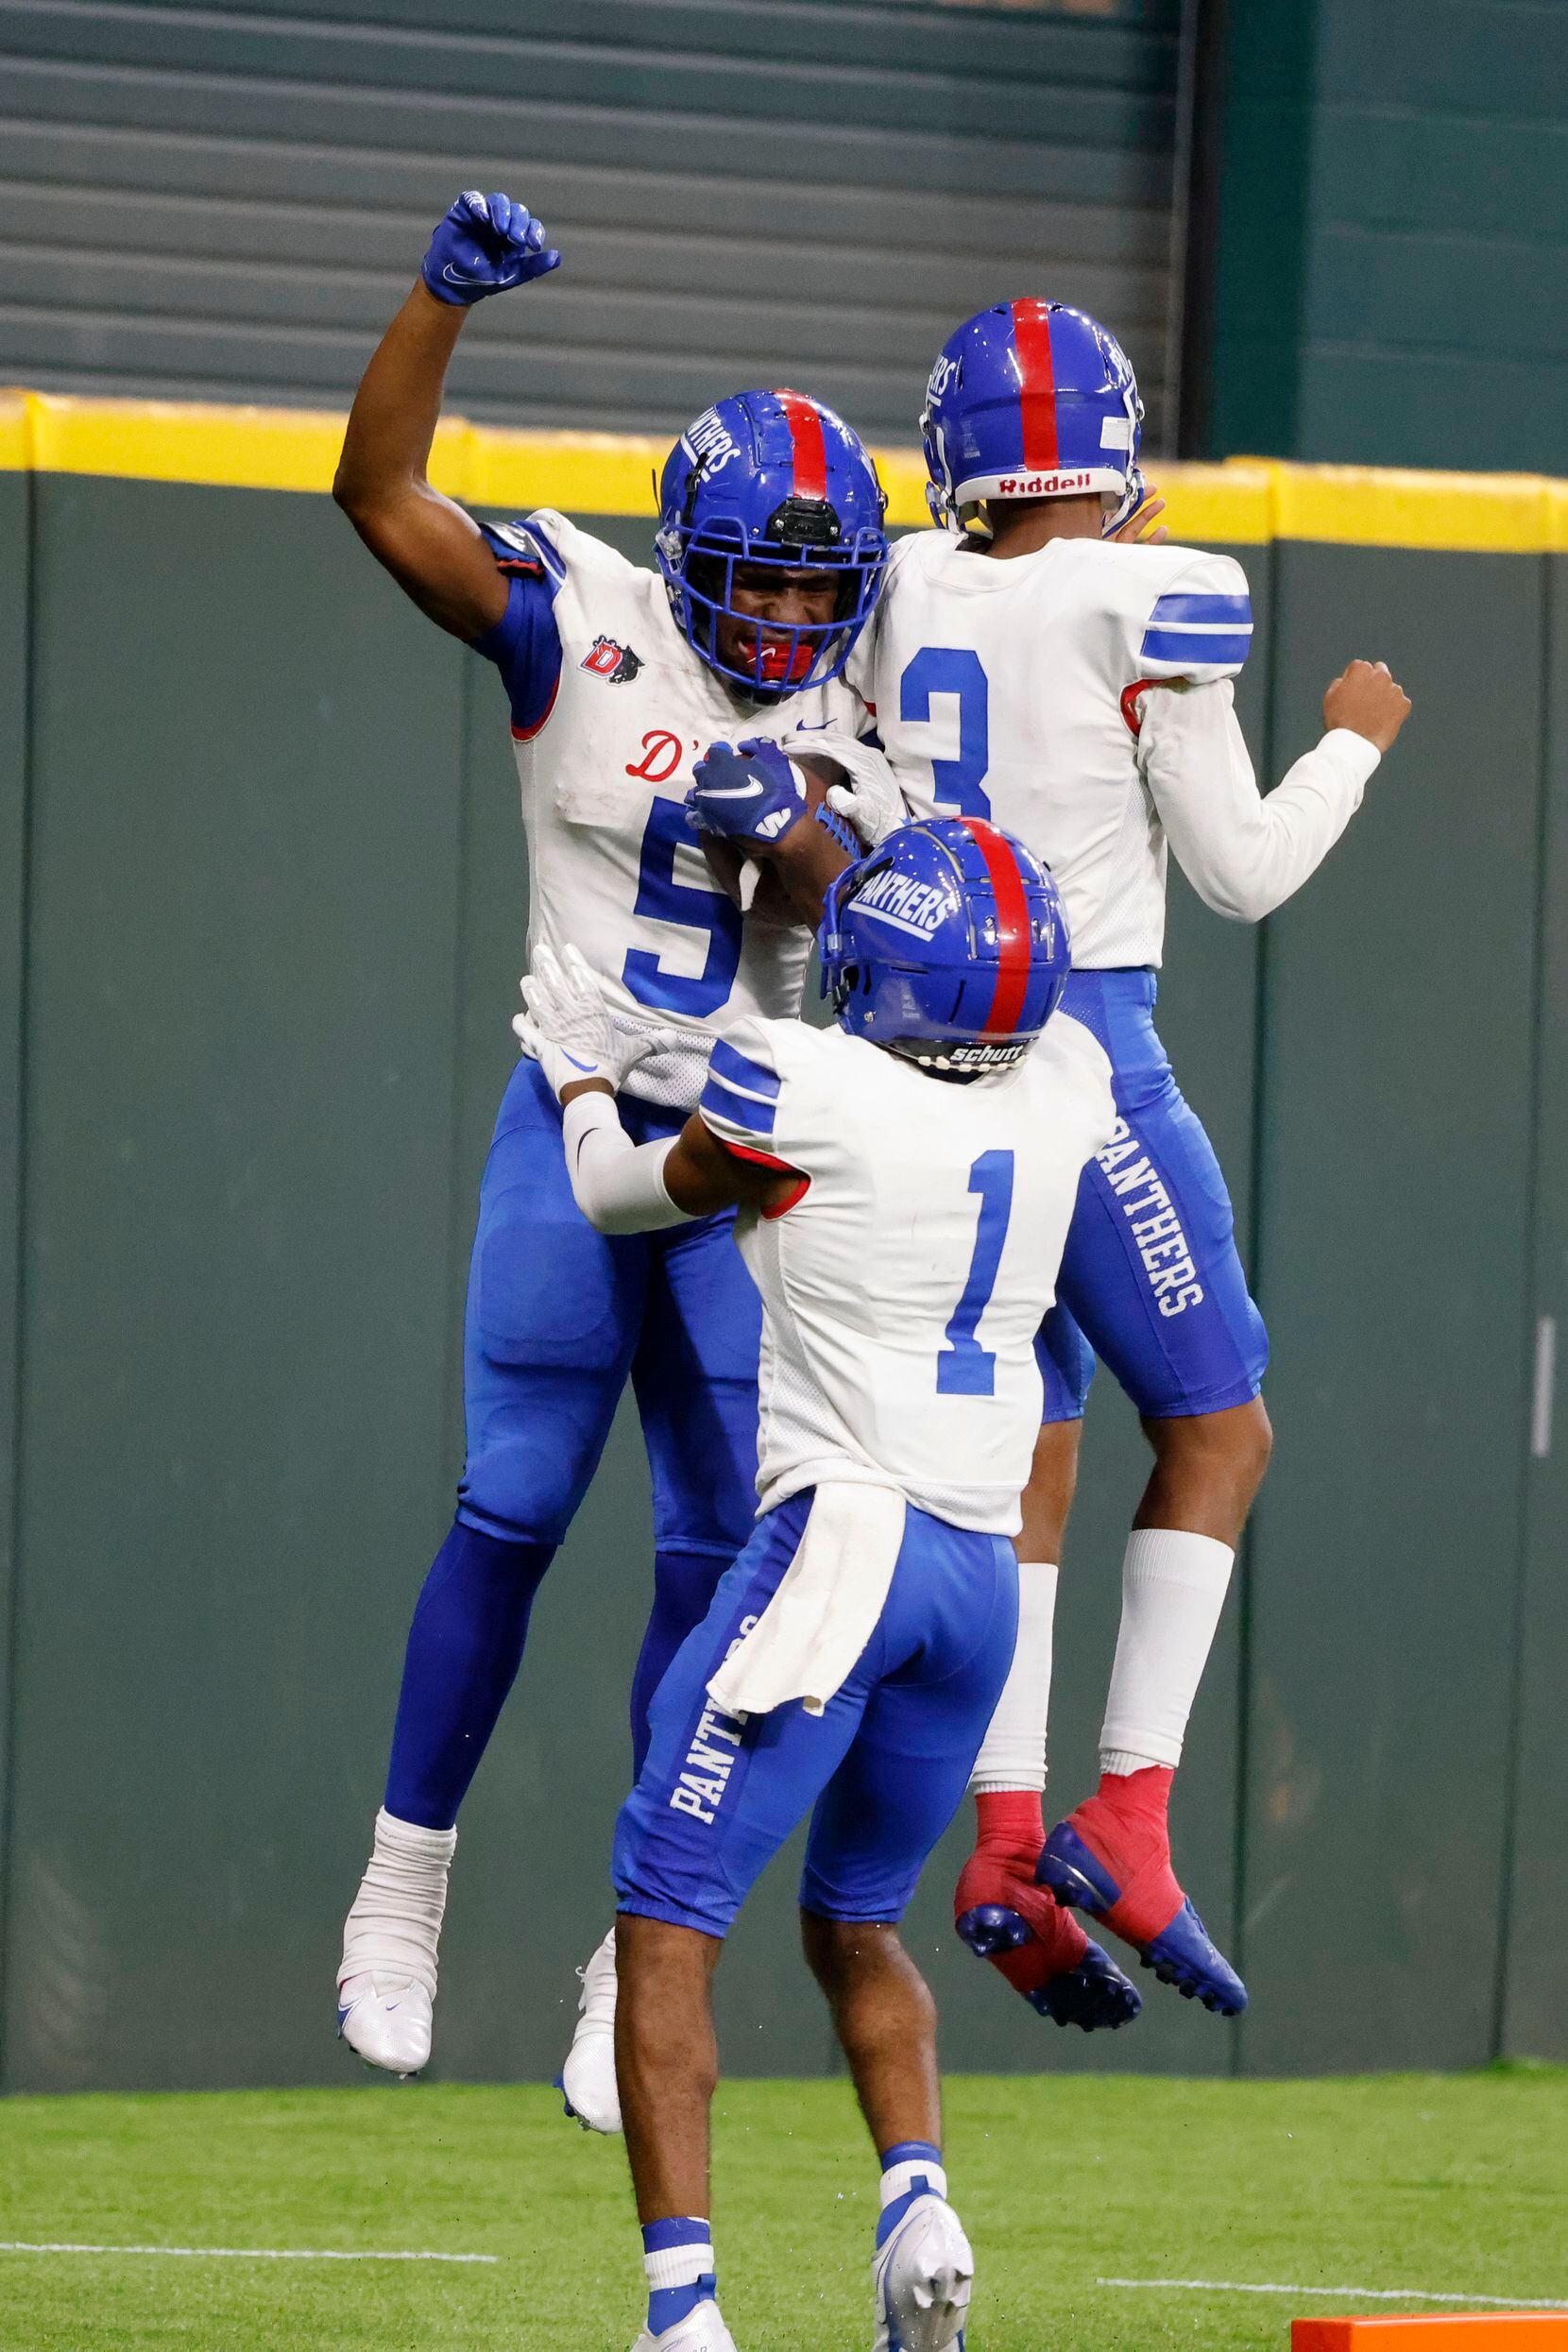 Duncaville’s Malachi Medlock (5) celebrates a touchdown with Lontrell Turner (1) and Solomon...